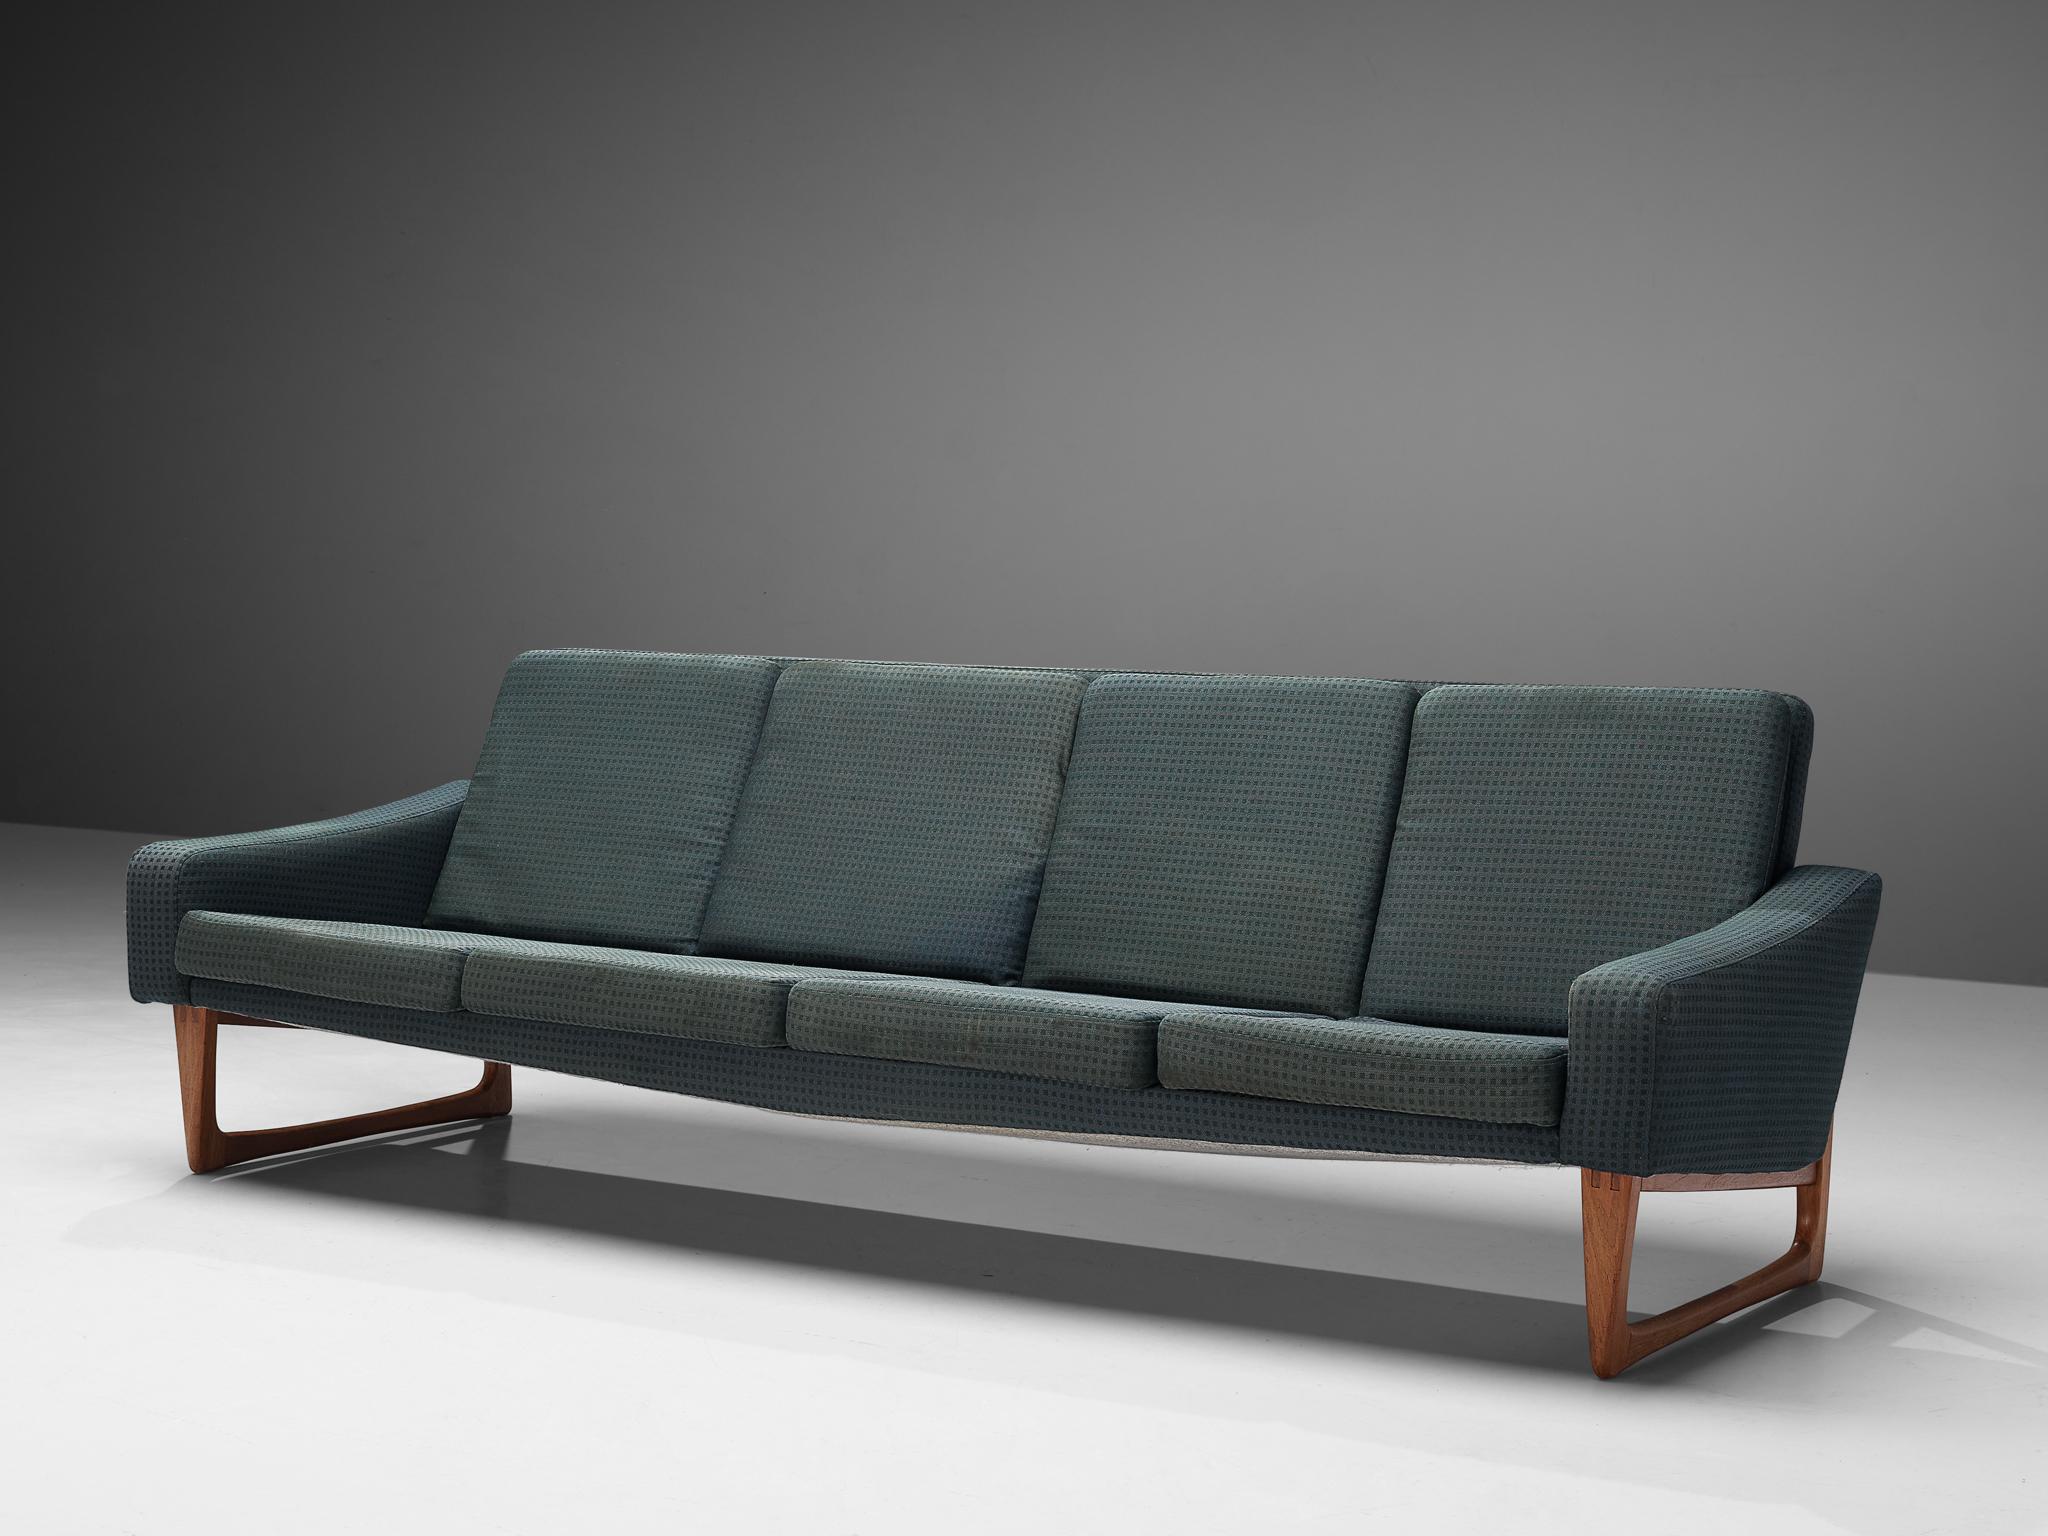 Sofa, blue fabric, teak, Scandinavia, 1950s

Stunning four seat sofa made in the 1950s. Grand in size, this sofa is not only beautiful in its simplistic shape, it also provides great comfort. The teak frame shows great craftsmanship and detailing.